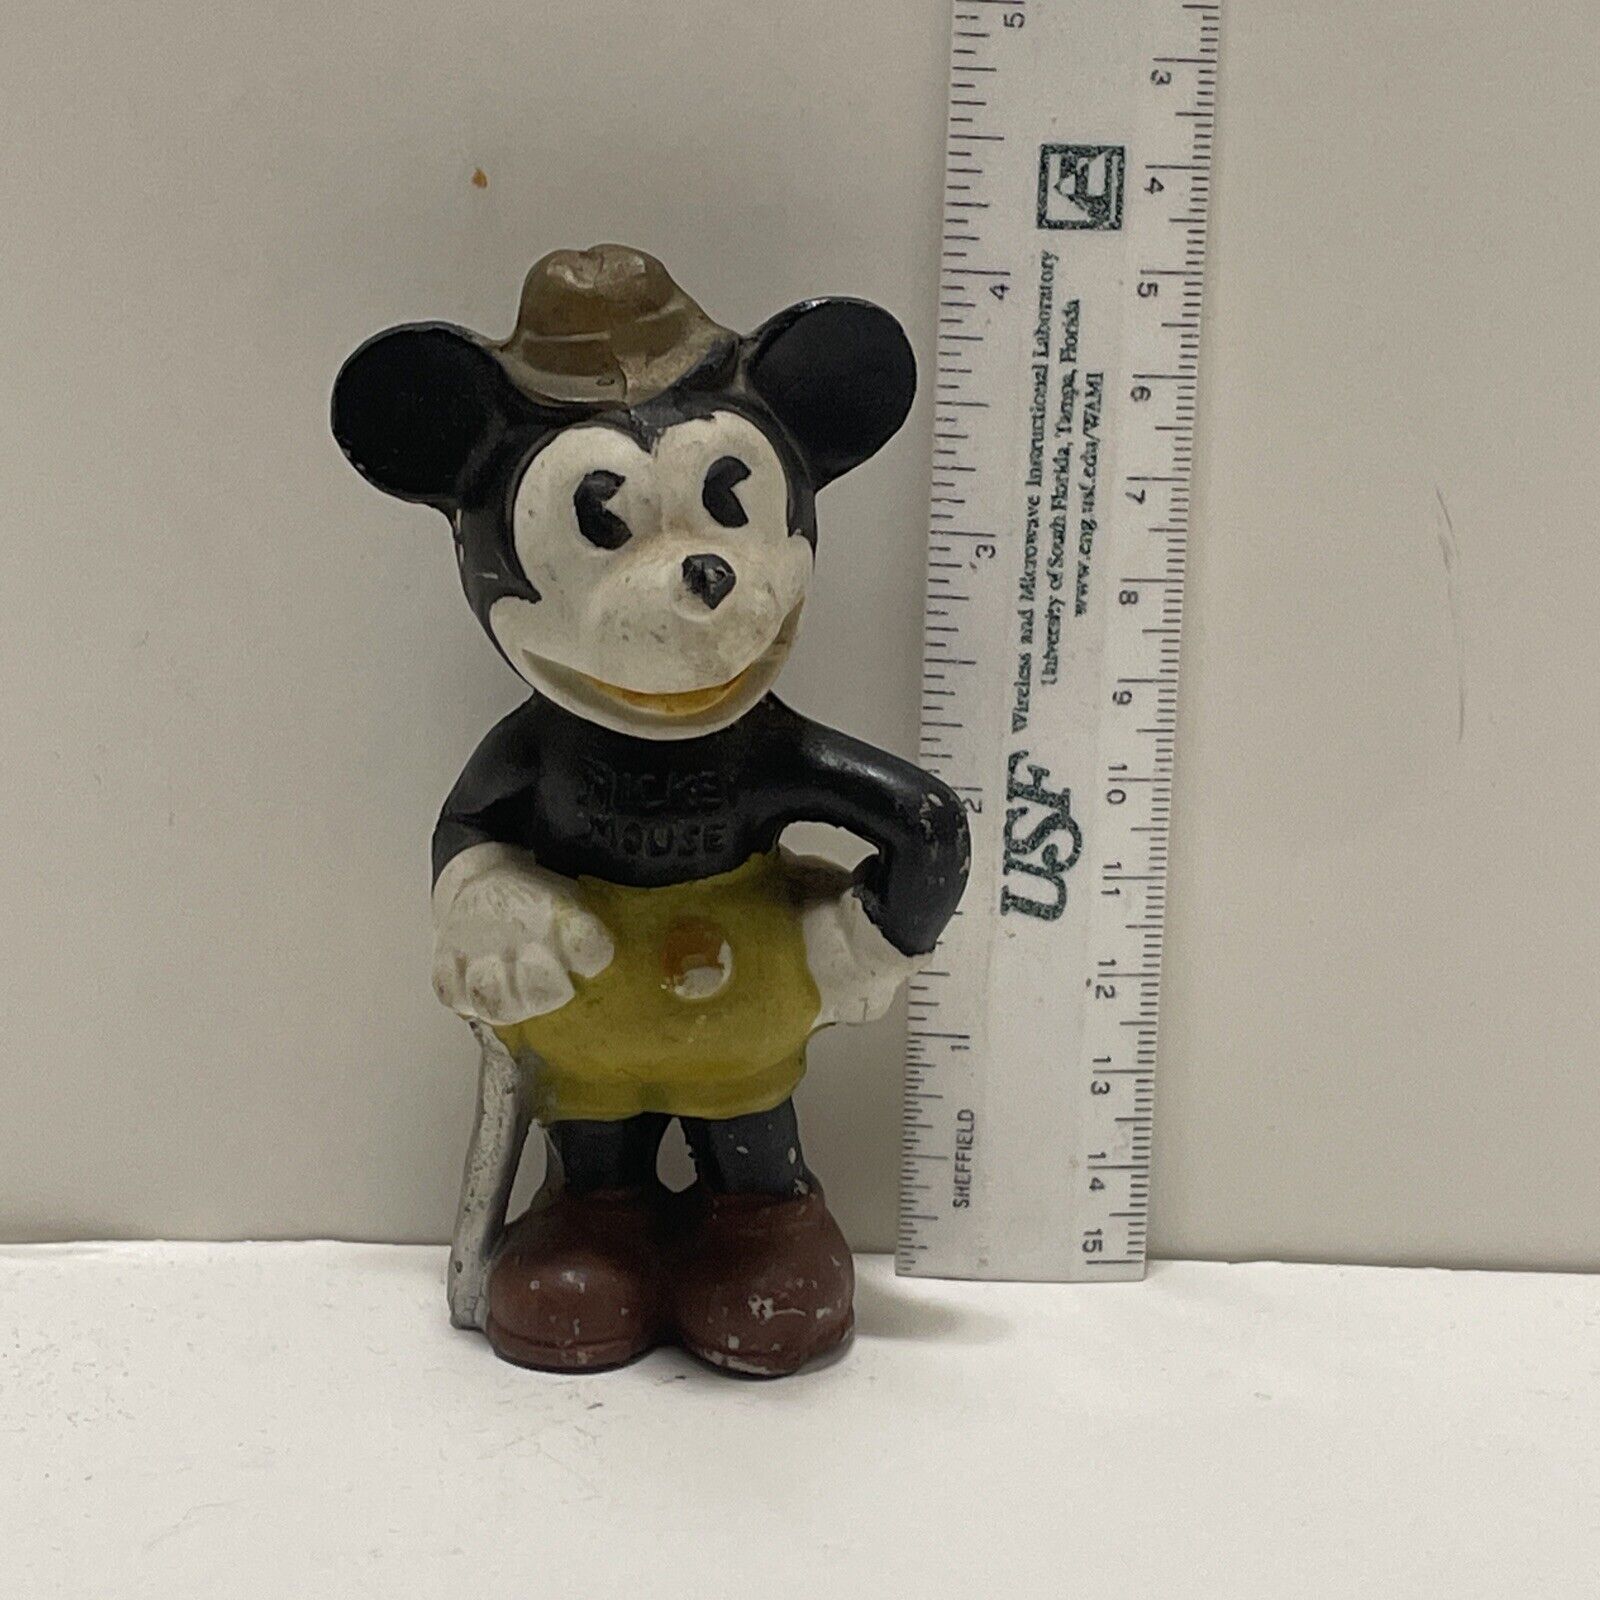 1930s Antique WALT DISNEY Mickey Mouse Ceramic Bisque Doll made in Japan